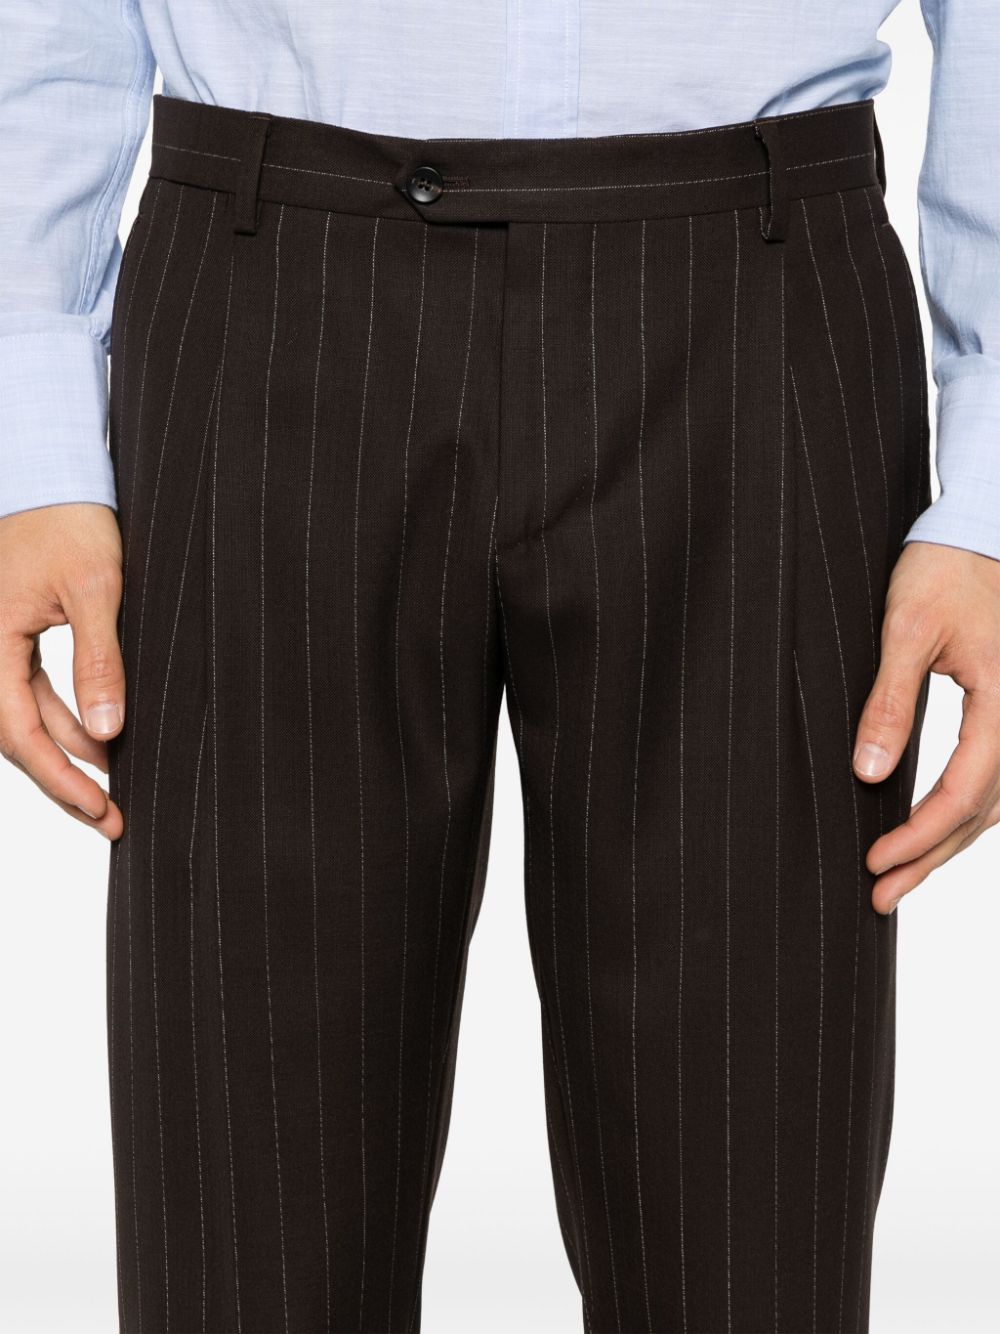 Double-breasted brown pinstripe suit